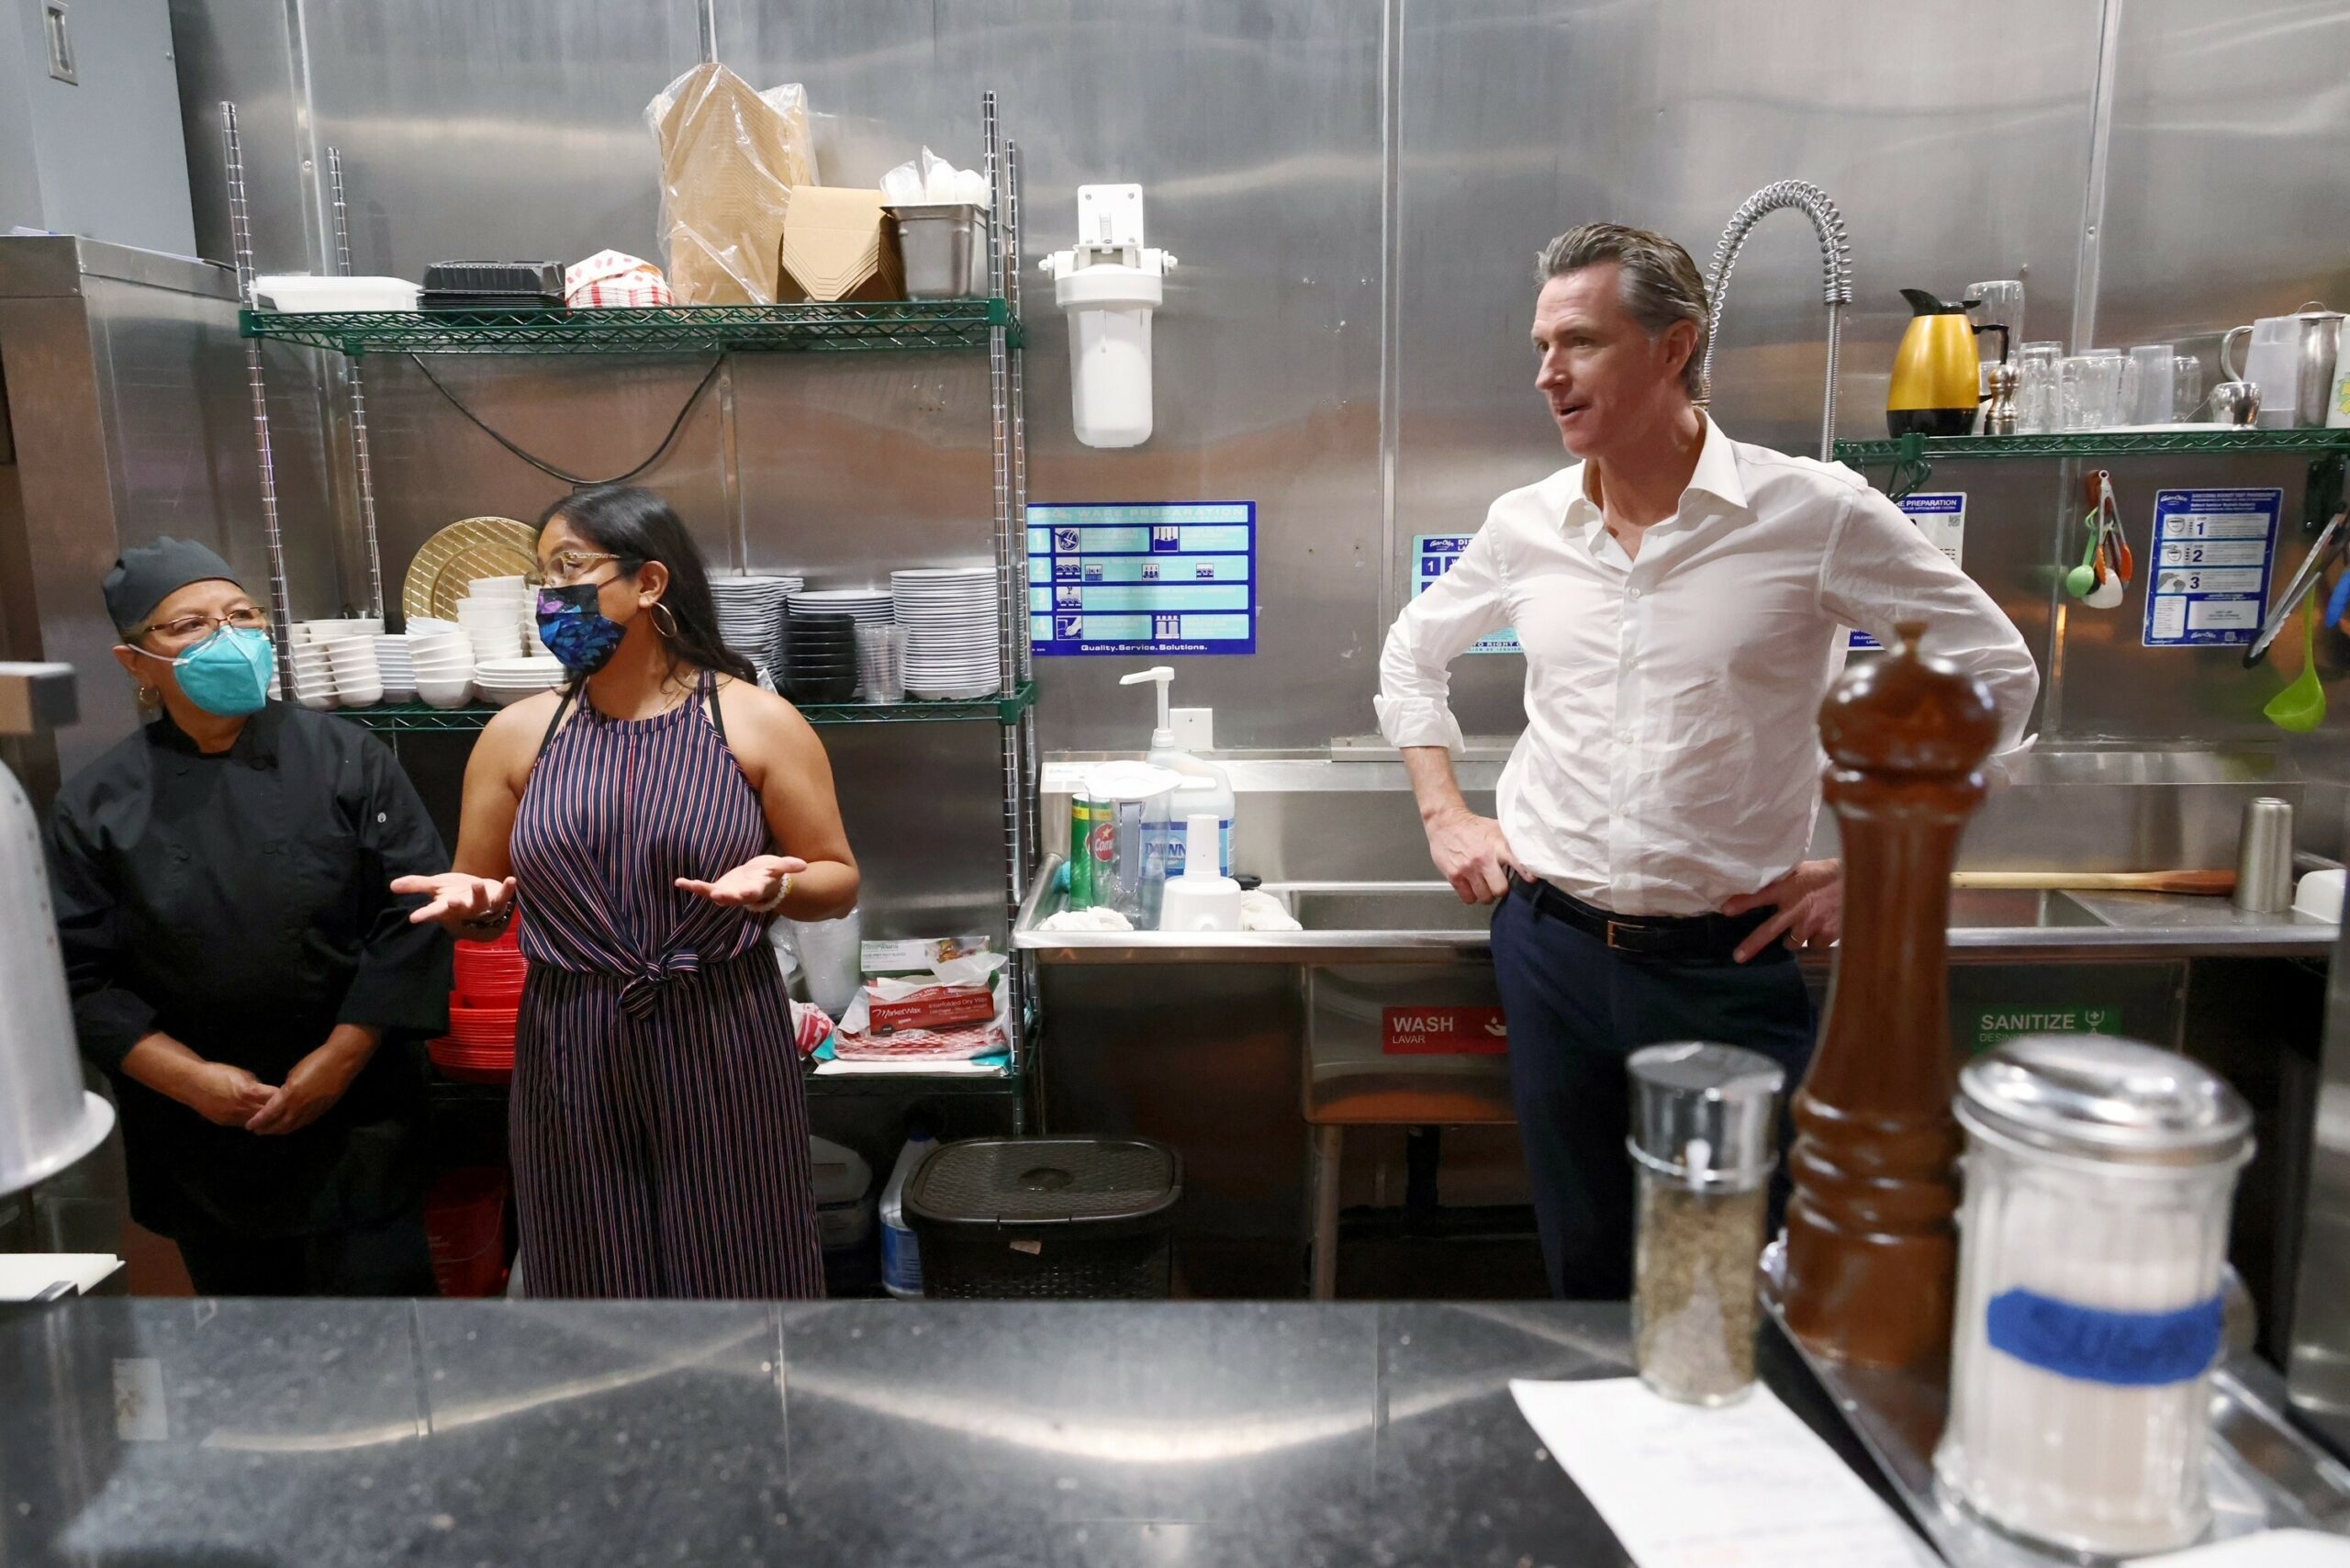 Governor Newsom visits small business owners supported by state’s Social Entrepreneurs for Economic Development initiative